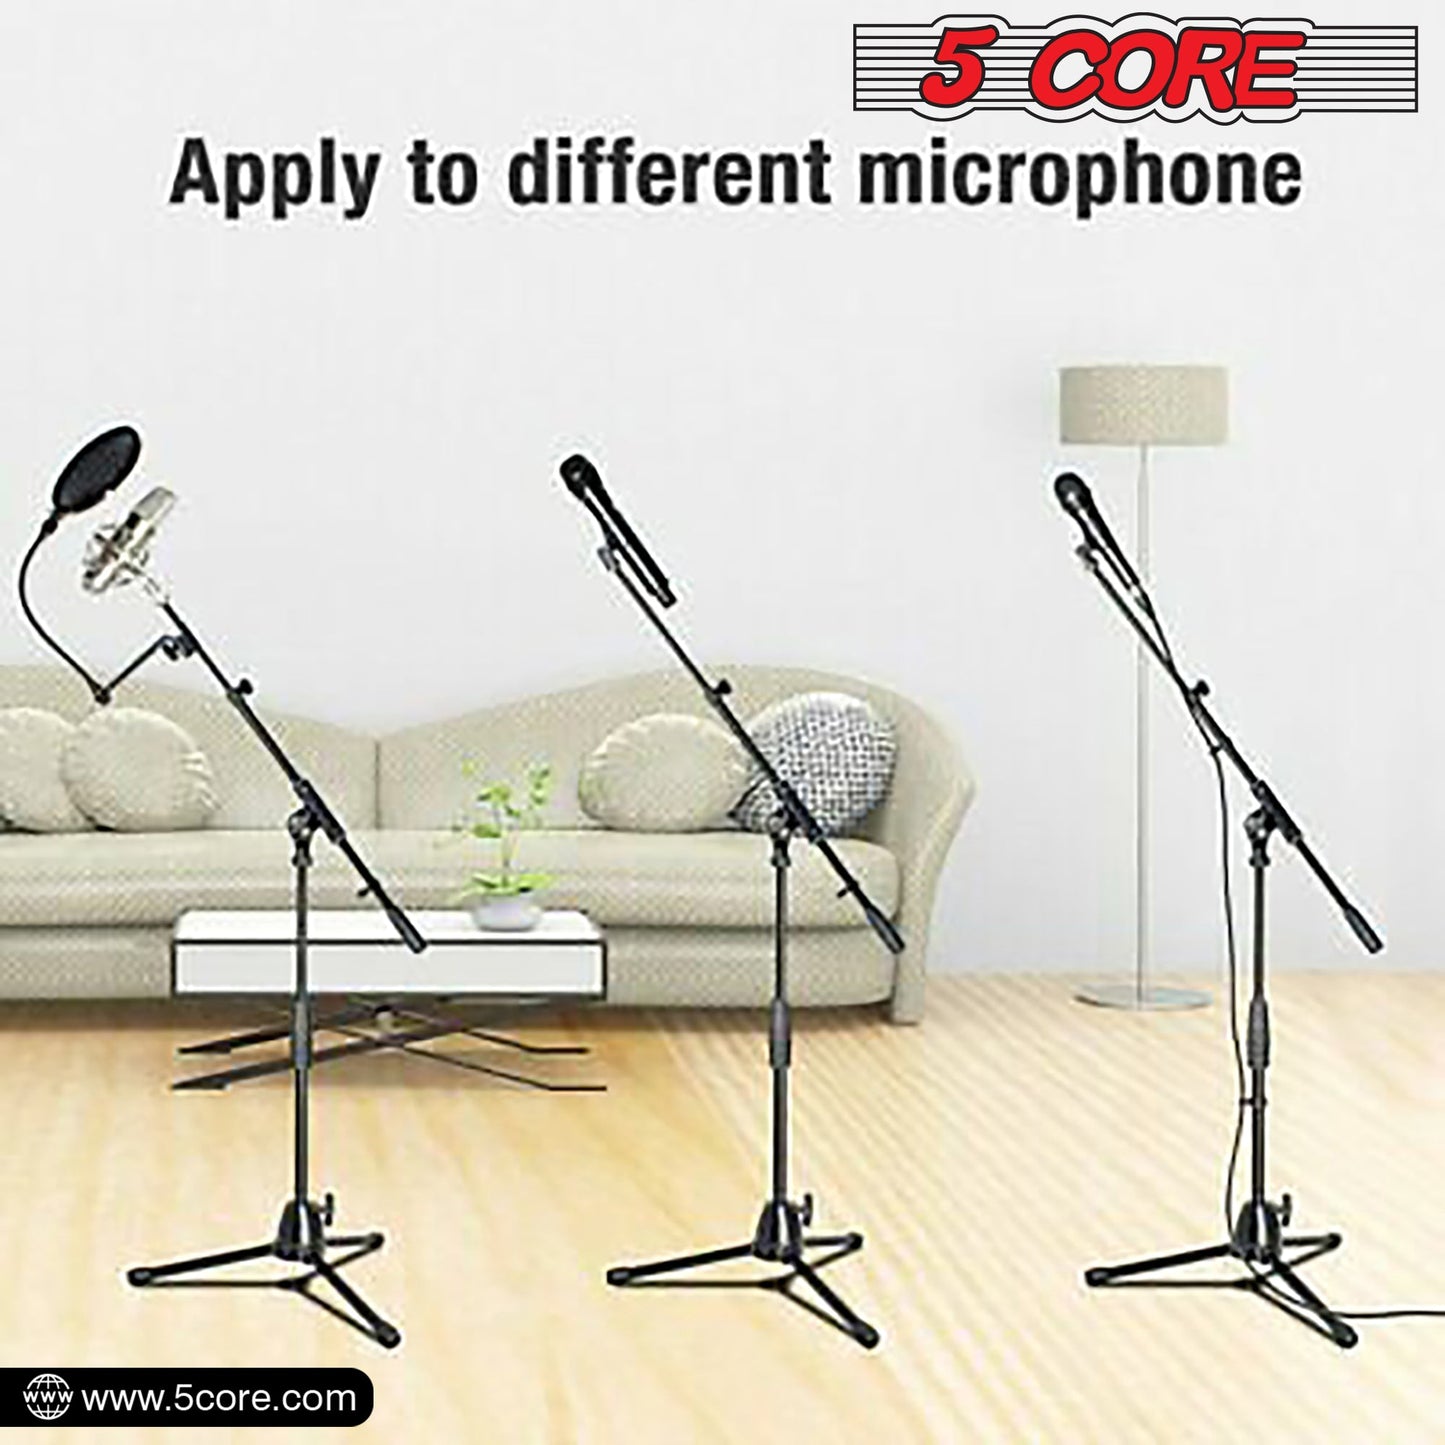 5 Core Foldable Tripod Mic Stand + Premium Vocal Dynamic Cardioid Mic Combo: Adjustable height, telescoping boom arm, secure tension lock. Includes 16ft XLR cable, mic clip, on/off switch. Ideal for karaoke MS 080 +ND58-6